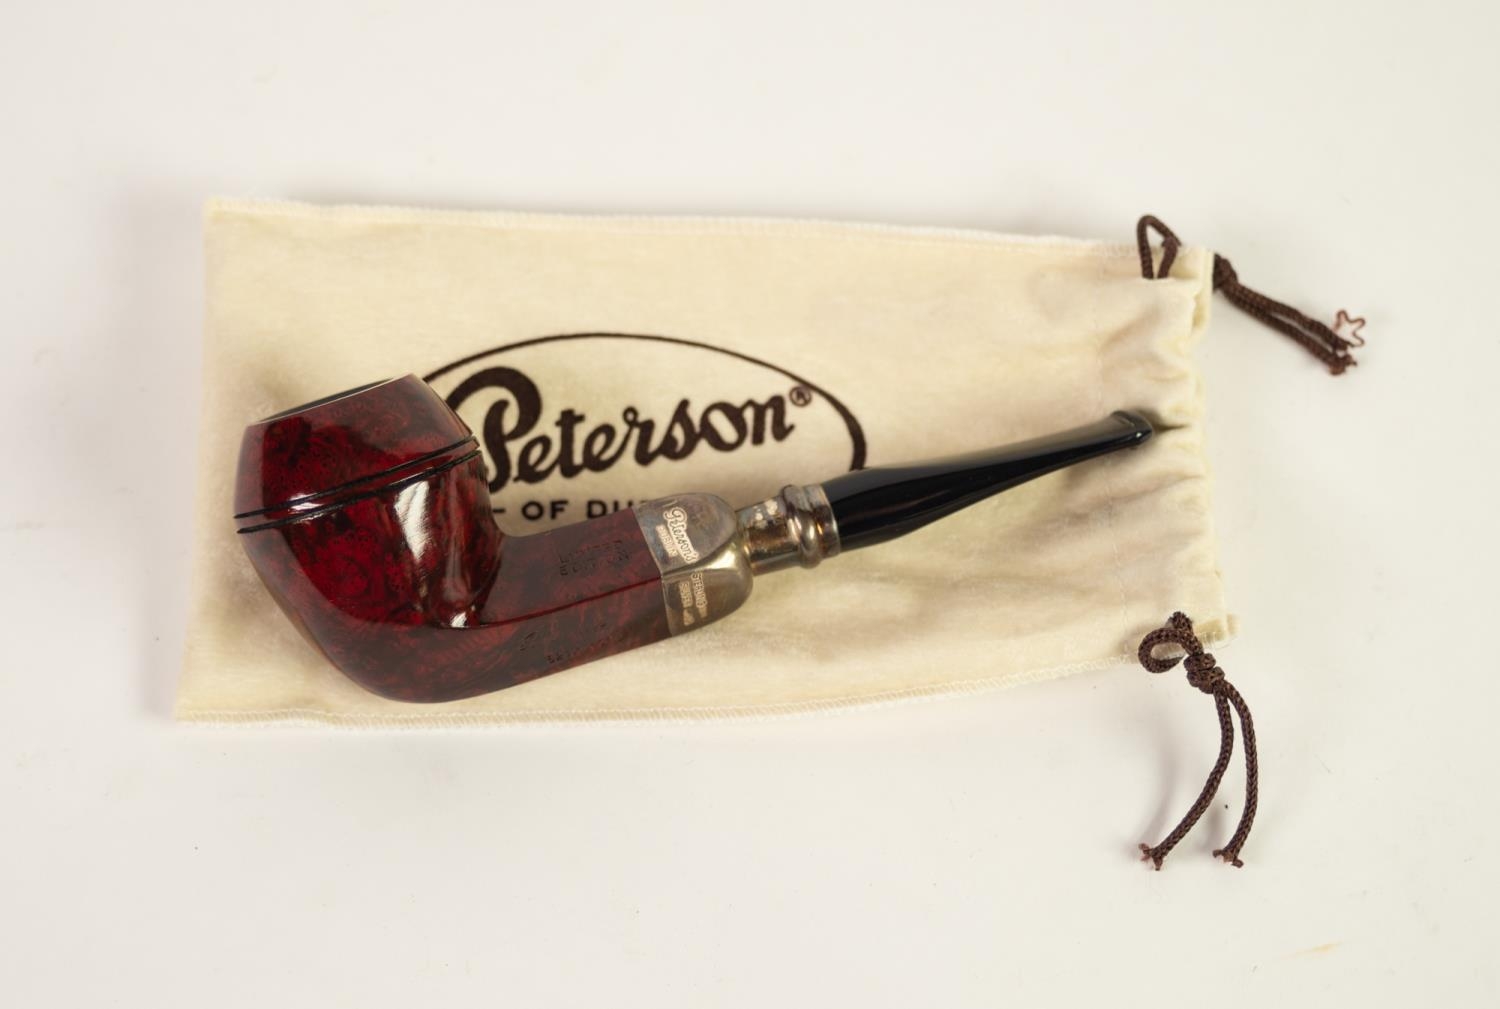 PETERSON, DUBLIN LIMITED EDITION SMOKING PIPE WITH STERLING SILBER COLLAR, (821/100), with cloth bag